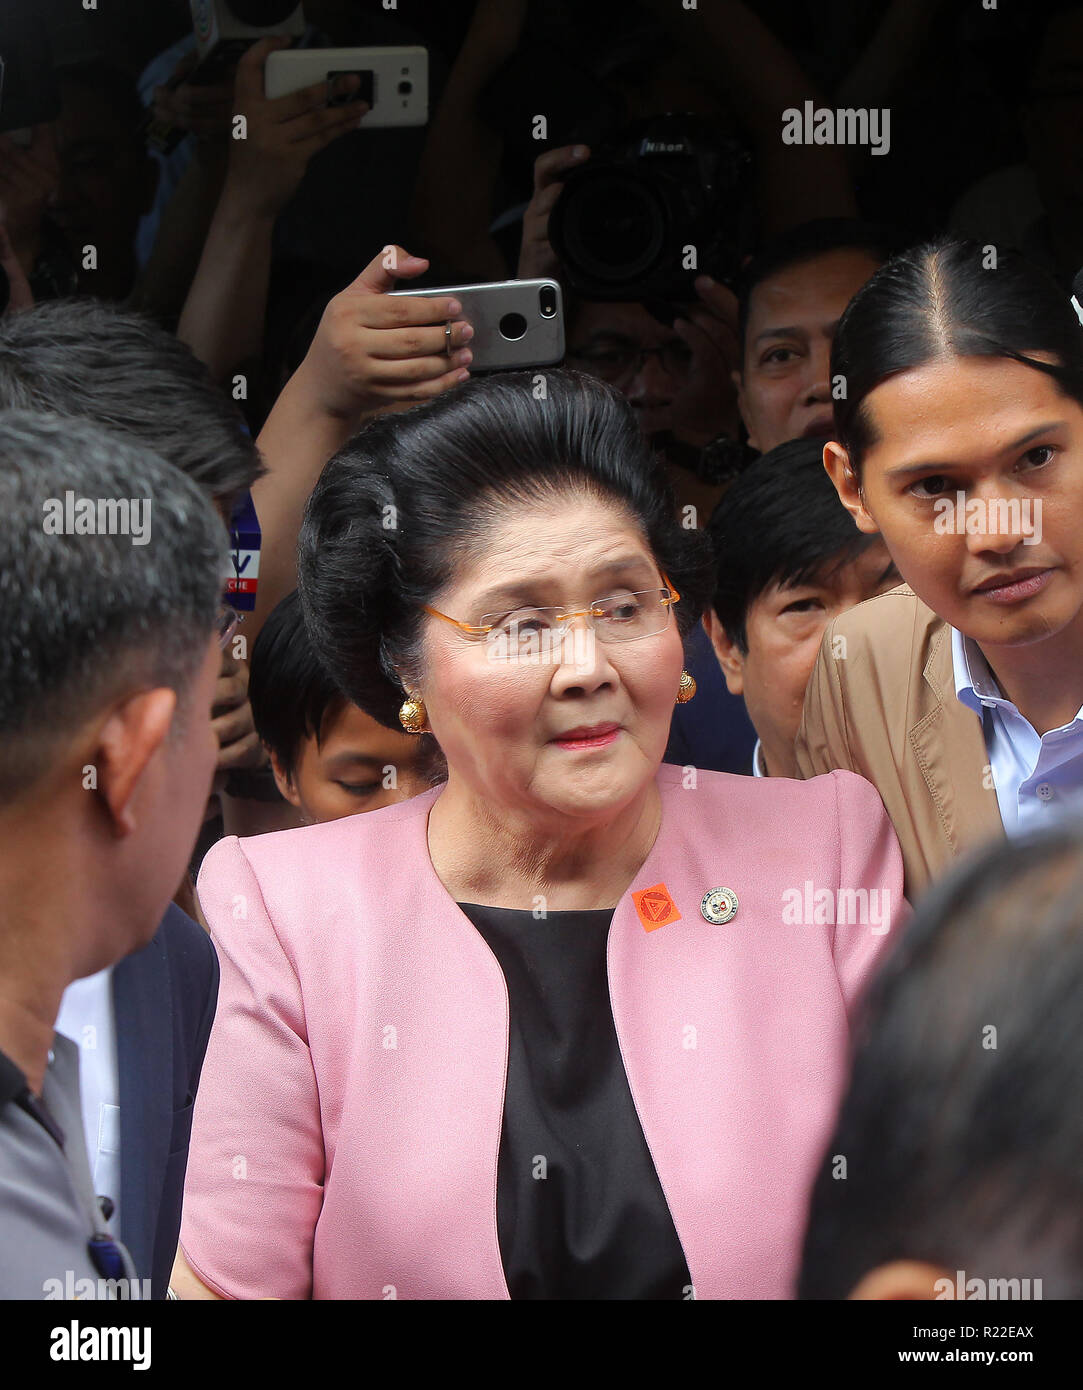 Quezon City, Philippines. 16th Nov, 2018. Former First Lady Imelda Marcos (C) is seen after posting bail at an anti-corruption court in Quezon City, the Philippines, Nov. 16, 2018. A Philippine anti-graft court on Nov. 9 sentenced former First Lady Imelda Marcos to at least 42 years in prison after she was found guilty of graft for creating private foundations in Switzerland and having 'financial interests' in companies while in office from 1968 to 1986. Credit: Rouelle Umali/Xinhua/Alamy Live News Stock Photo